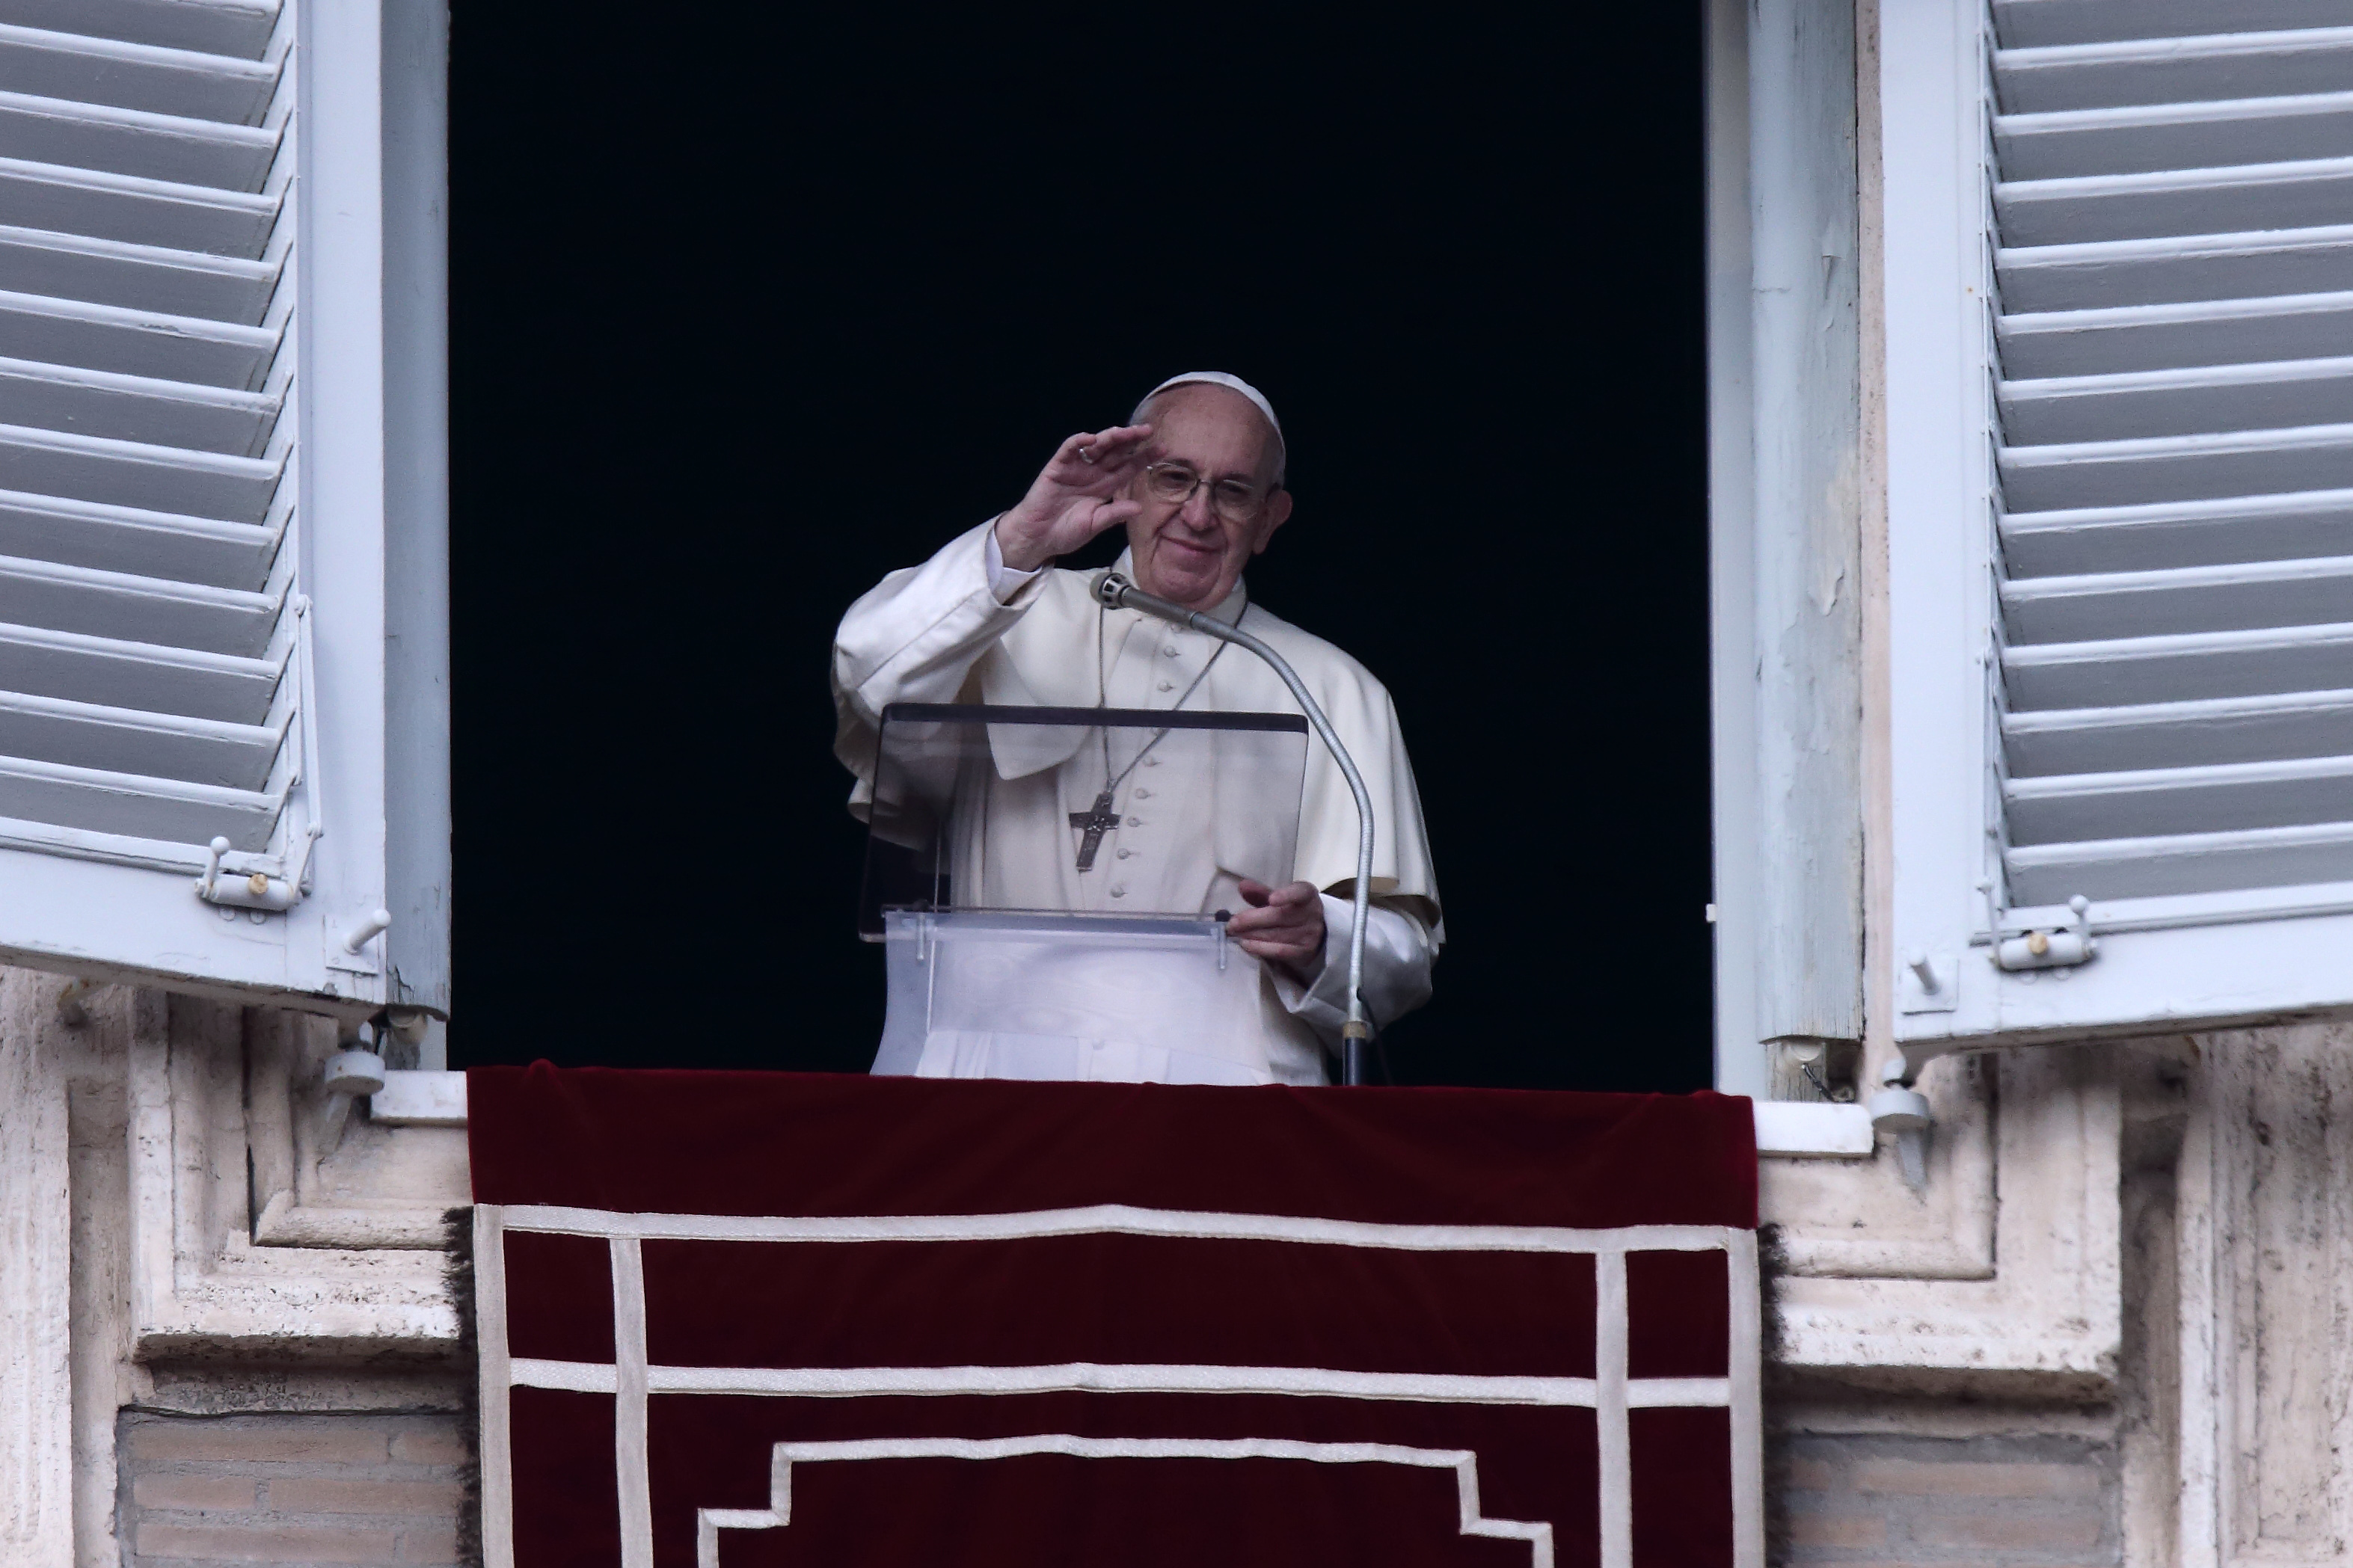 Always guard and defend family, says Pope